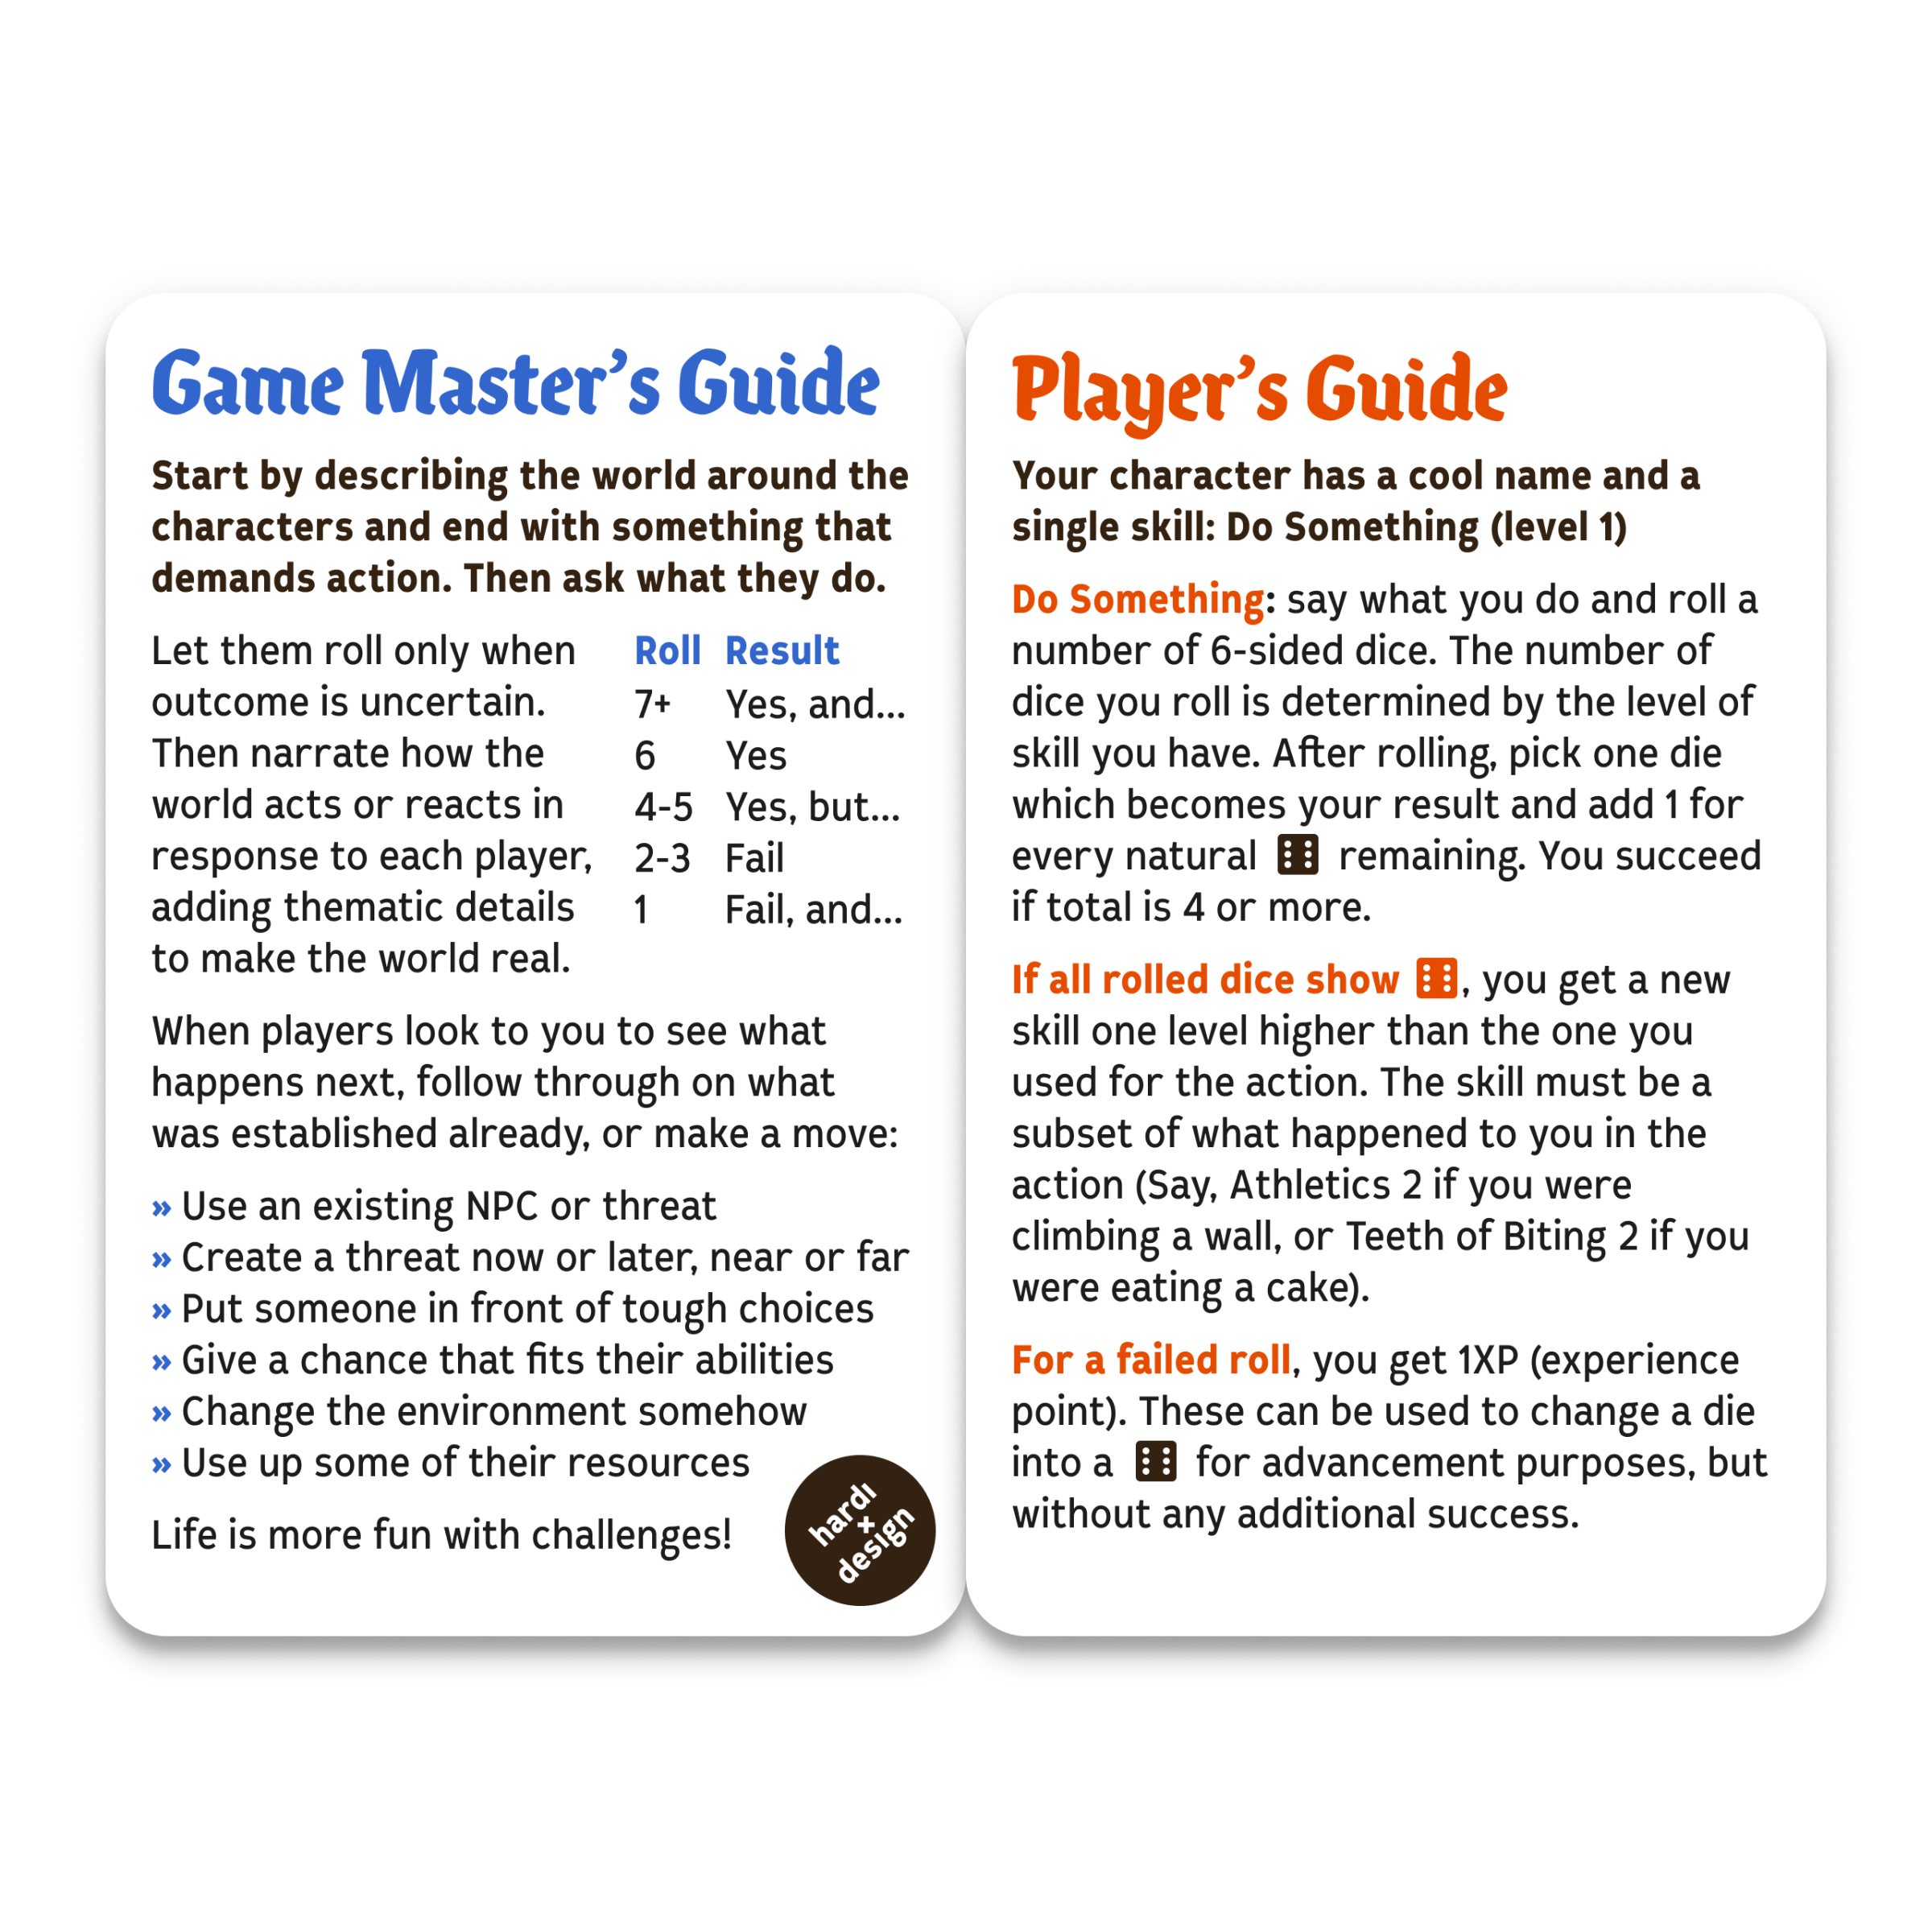 Role-playing game on a single card